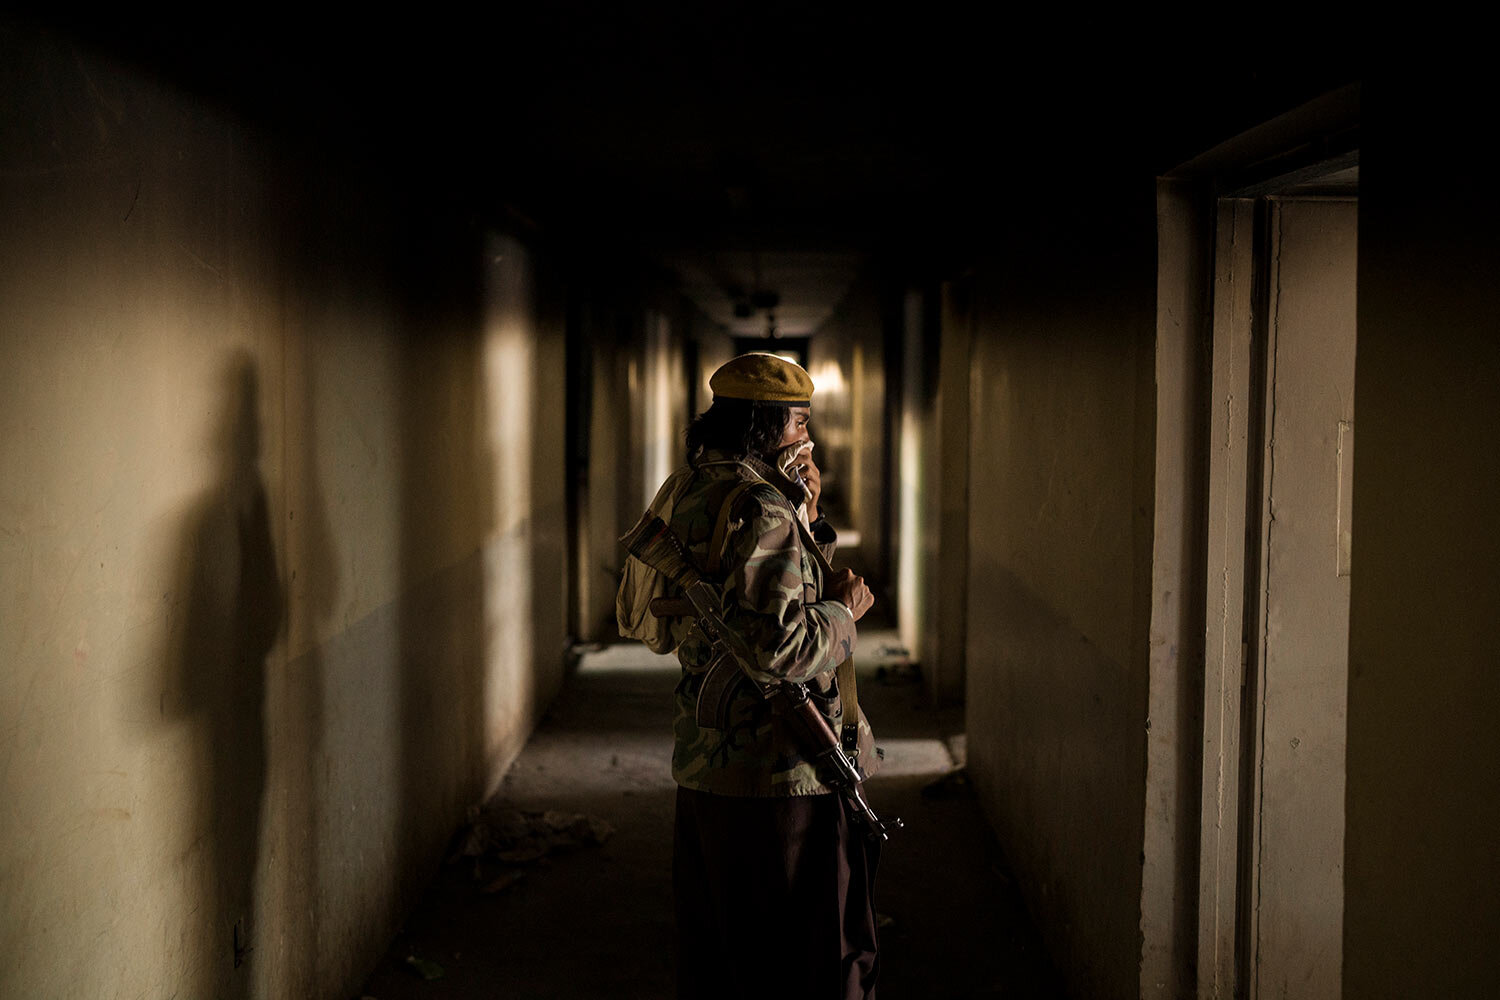  A Taliban fighter covers his nose as he walks inside an abandoned area of the Pul-e-Charkhi prison in Kabul, Afghanistan, Monday, Sept. 13, 2021. (AP Photo/Felipe Dana)  